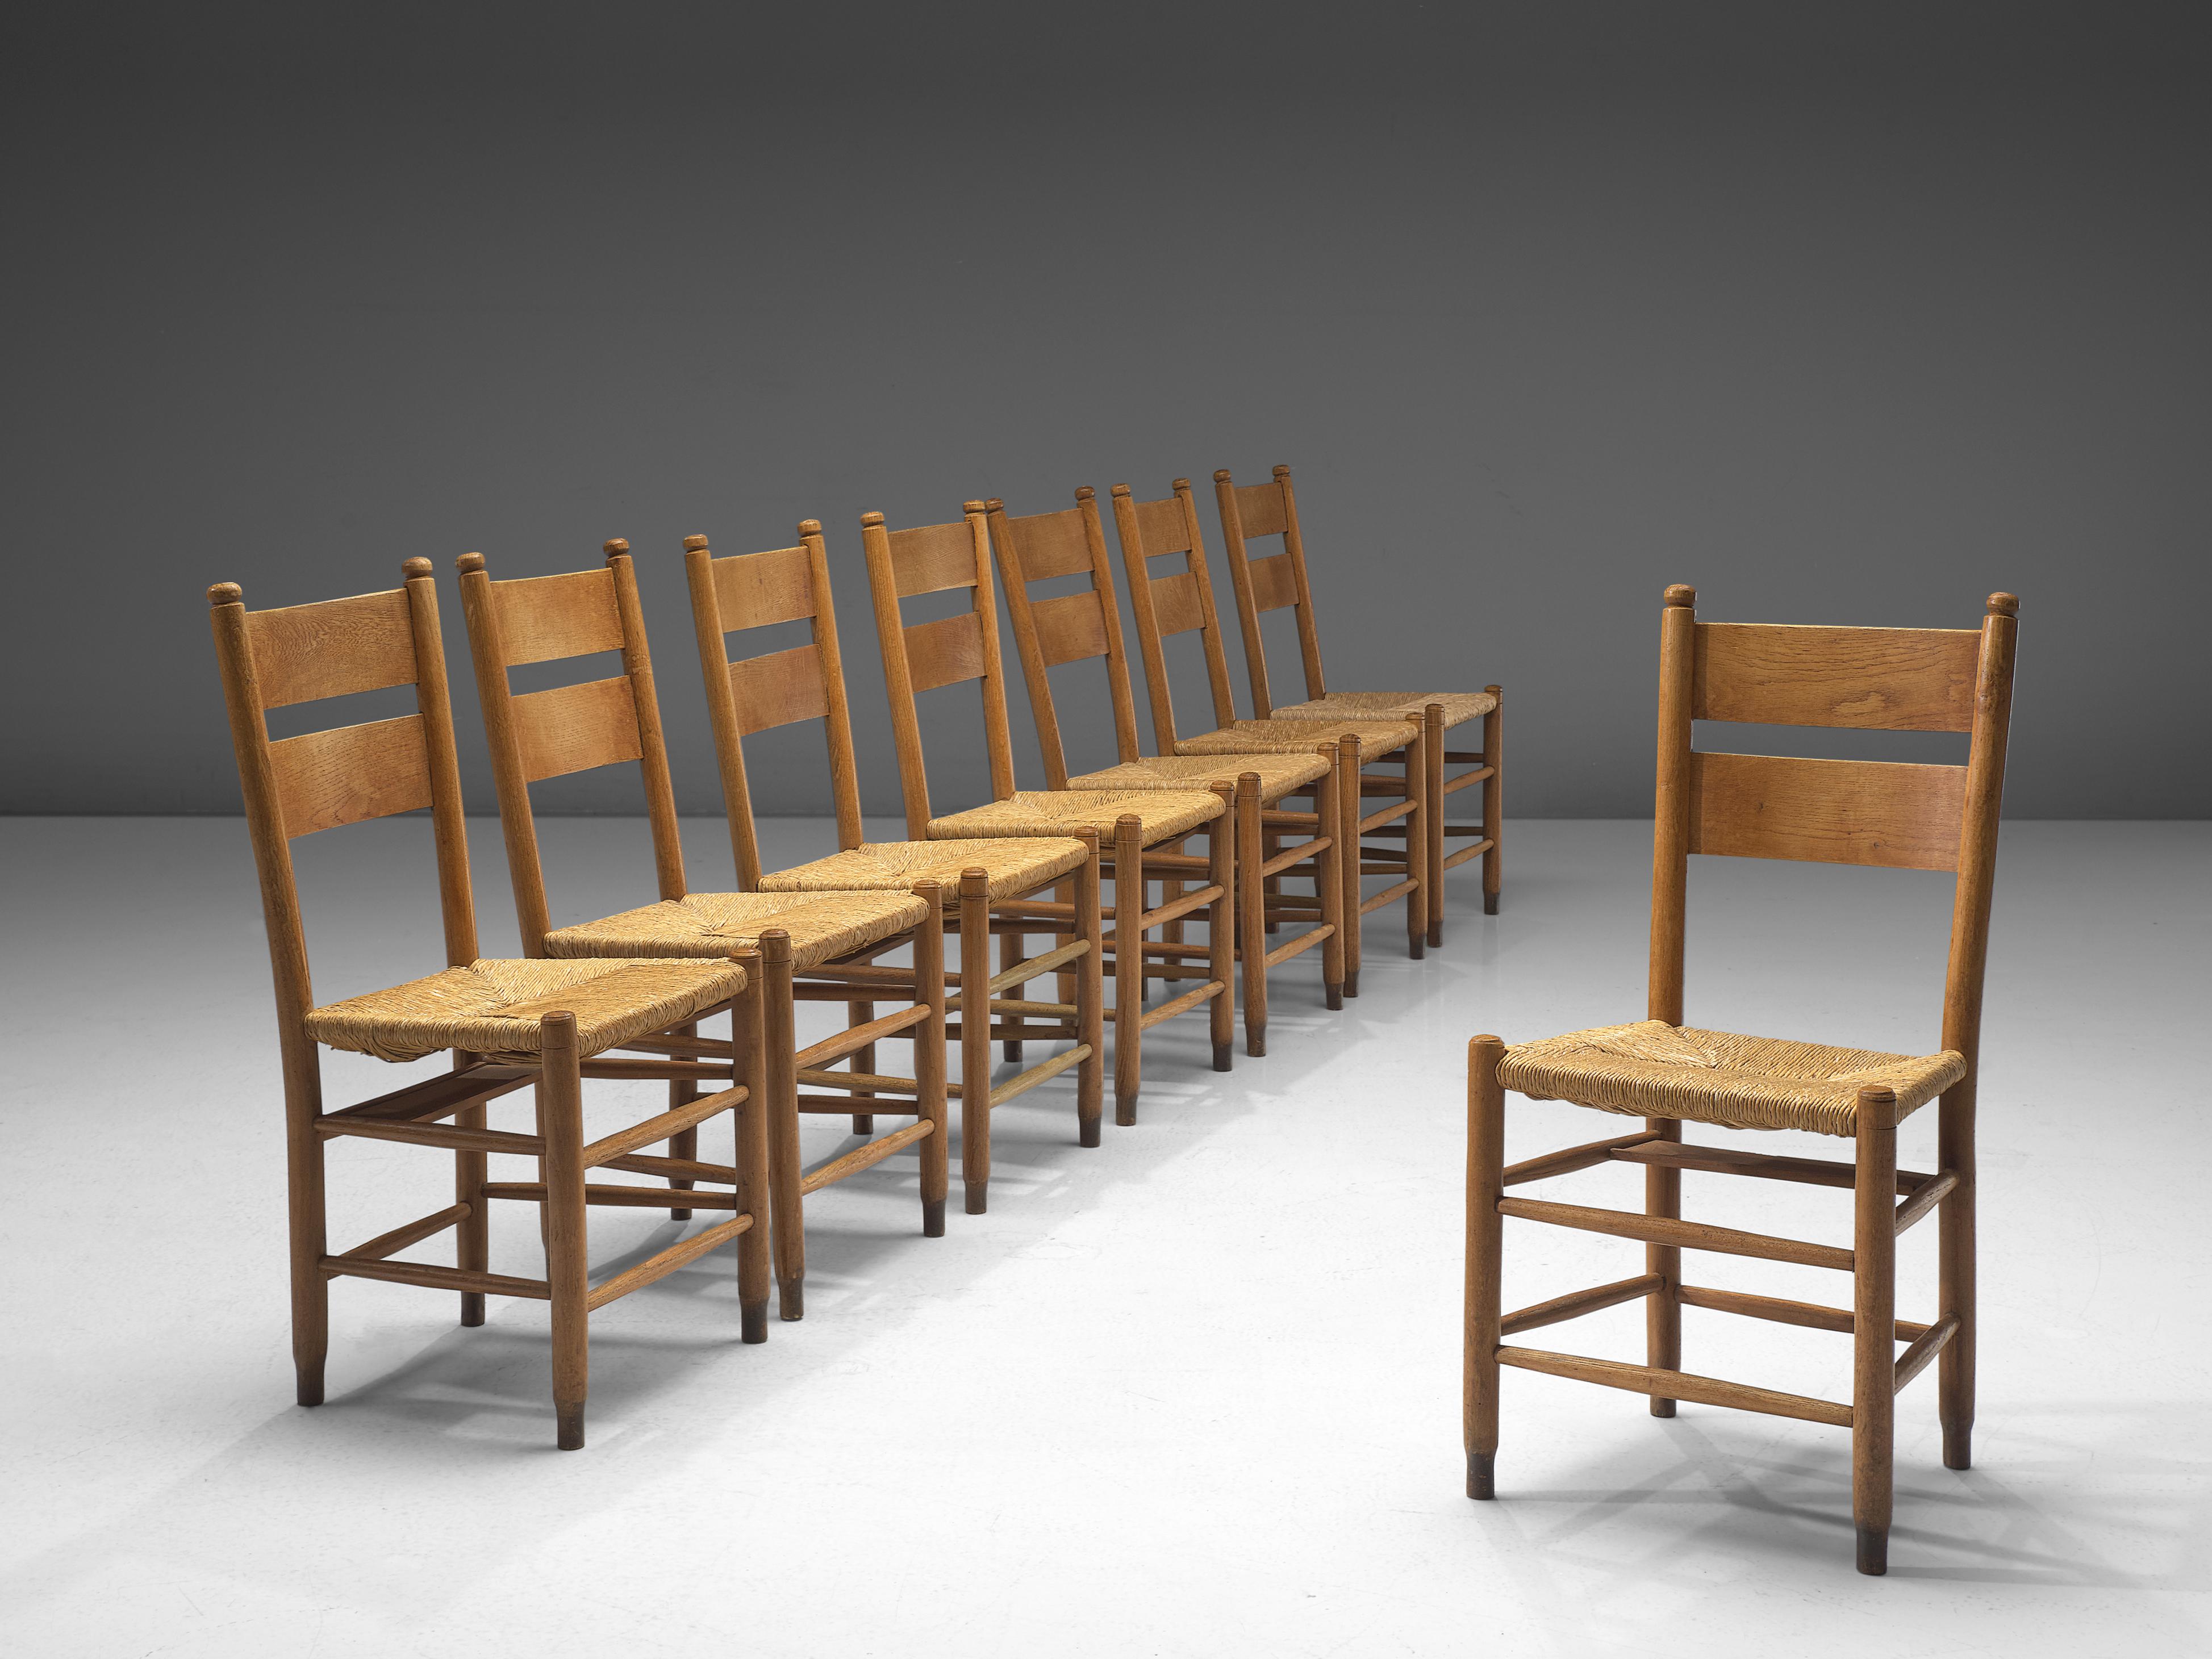 Danish church chairs, oak and rush seating, Denmark, 1960s.

Rustic Danish church chairs made in oak and with a rush seat. The chairs features subtle details, such as the double backrest and double slats below the seat. Please note we have a very